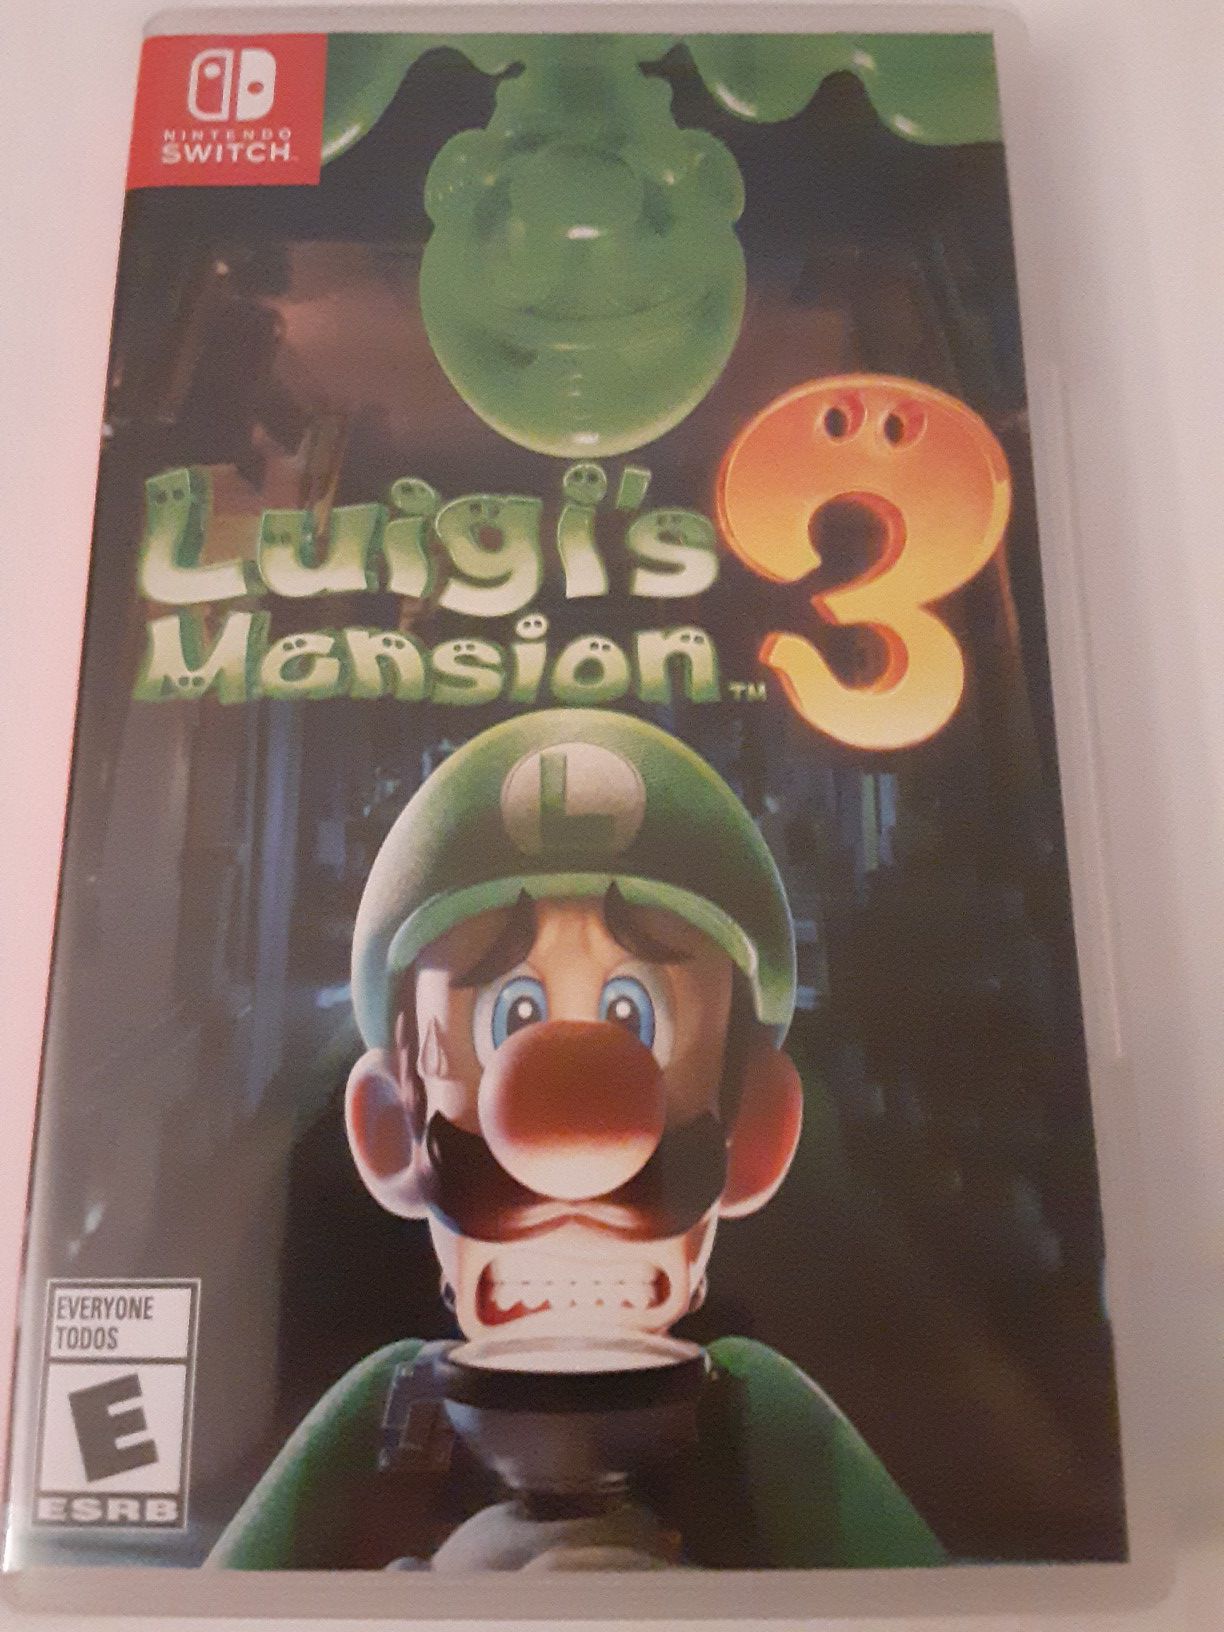 Luigis Mansion 3 100% Complete For Nintendo Switch NEW